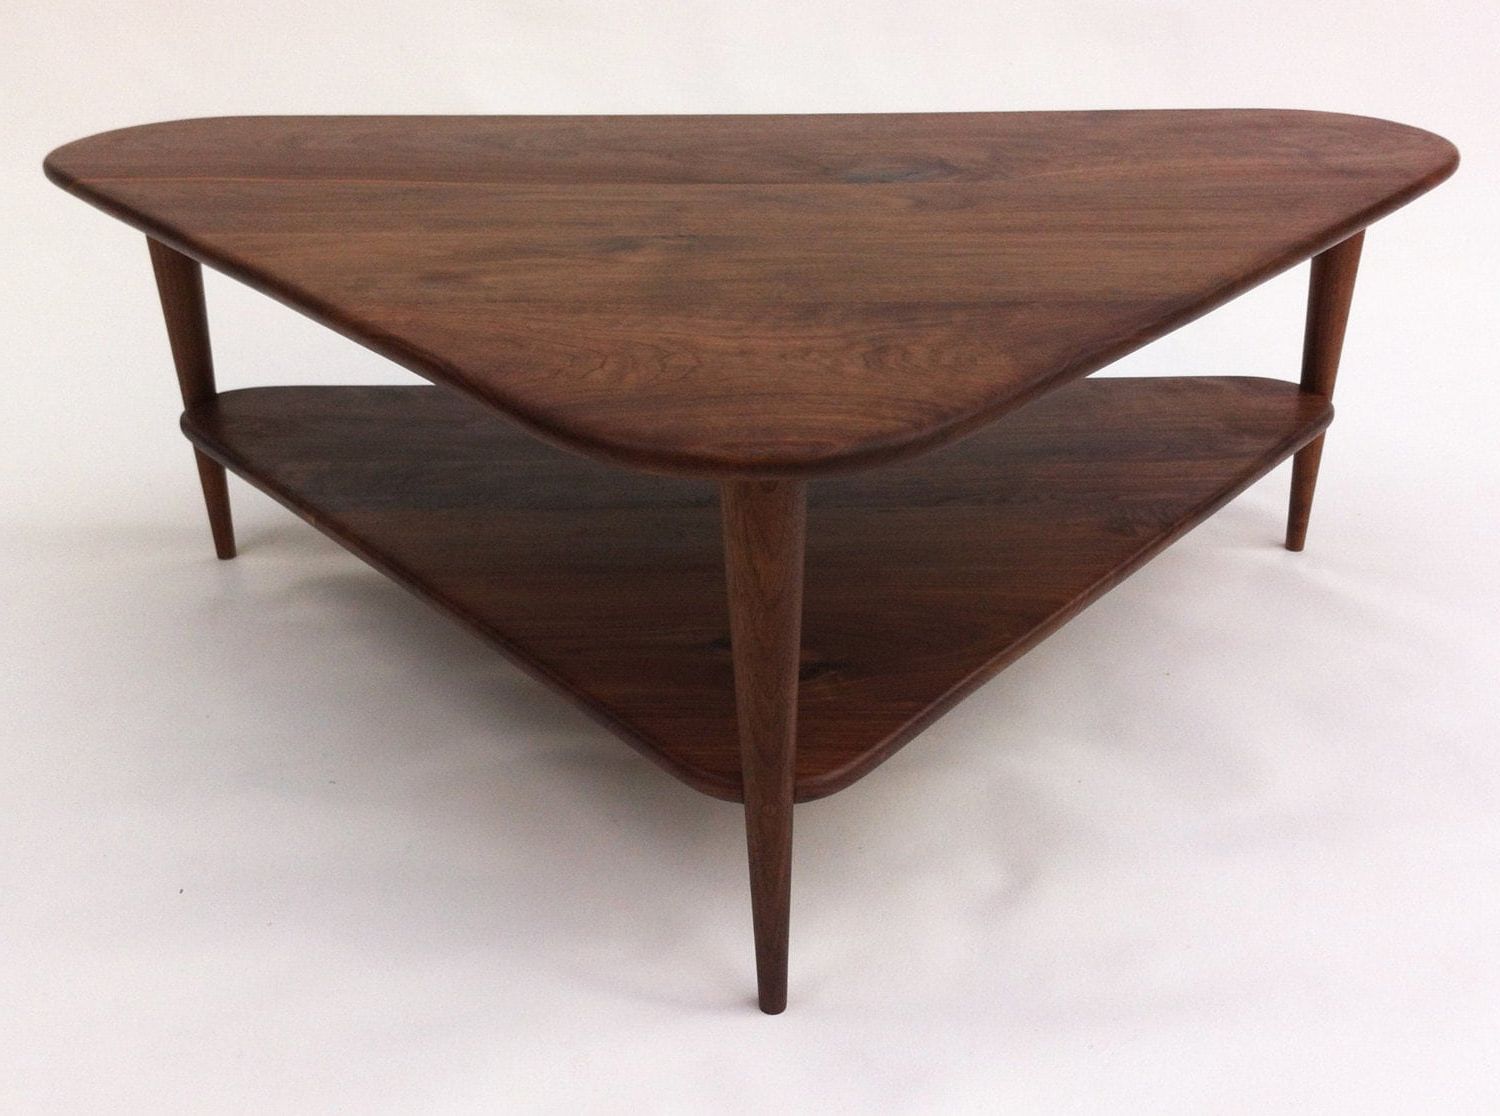 Mid Century Modern Coffee Table W/ Shelf Triangle Cocktail Intended For Widely Used White Triangular Coffee Tables (View 13 of 20)